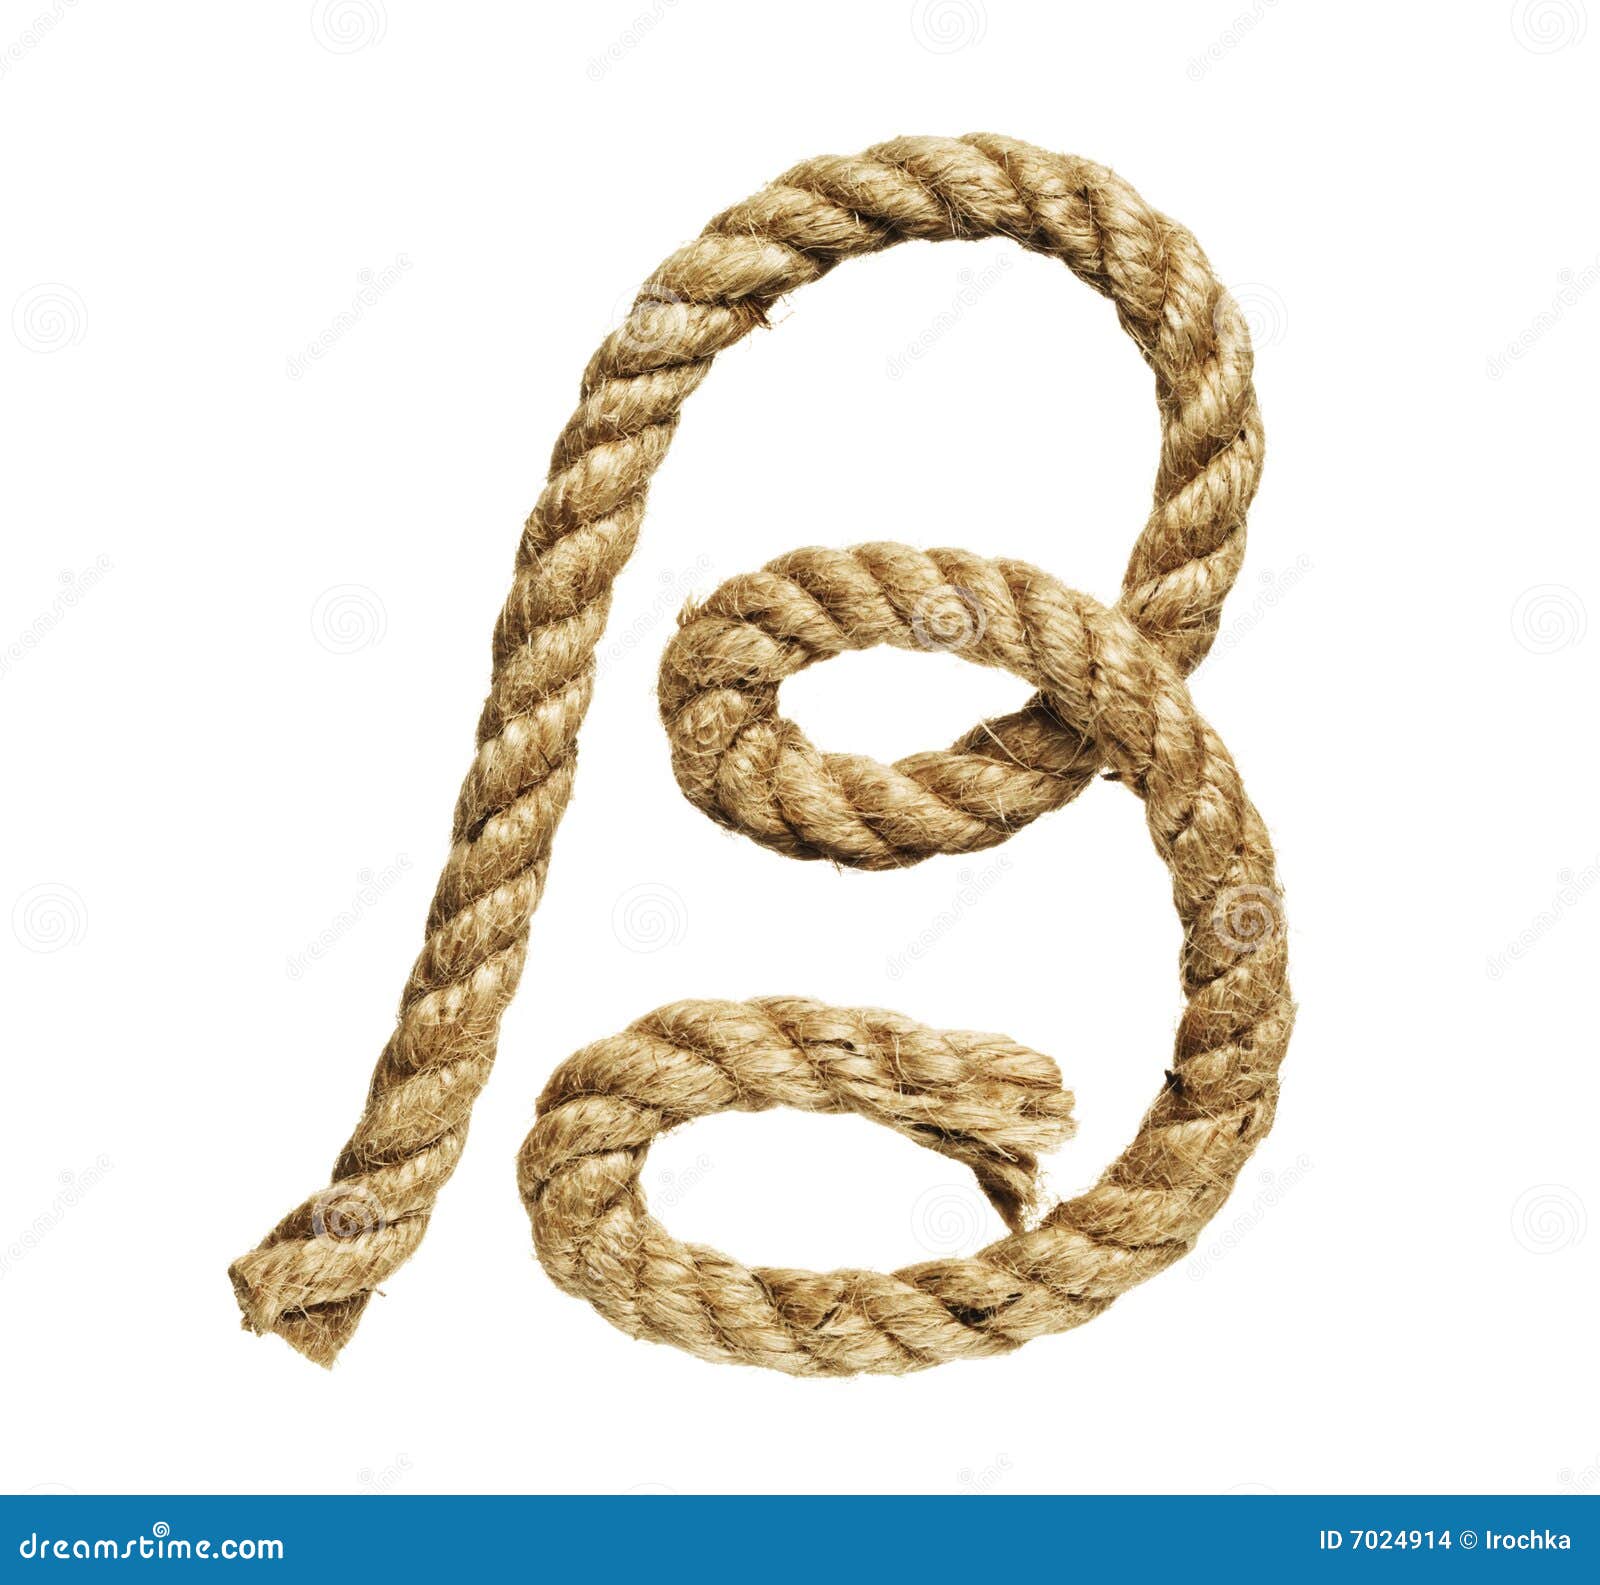 rope forming letter b